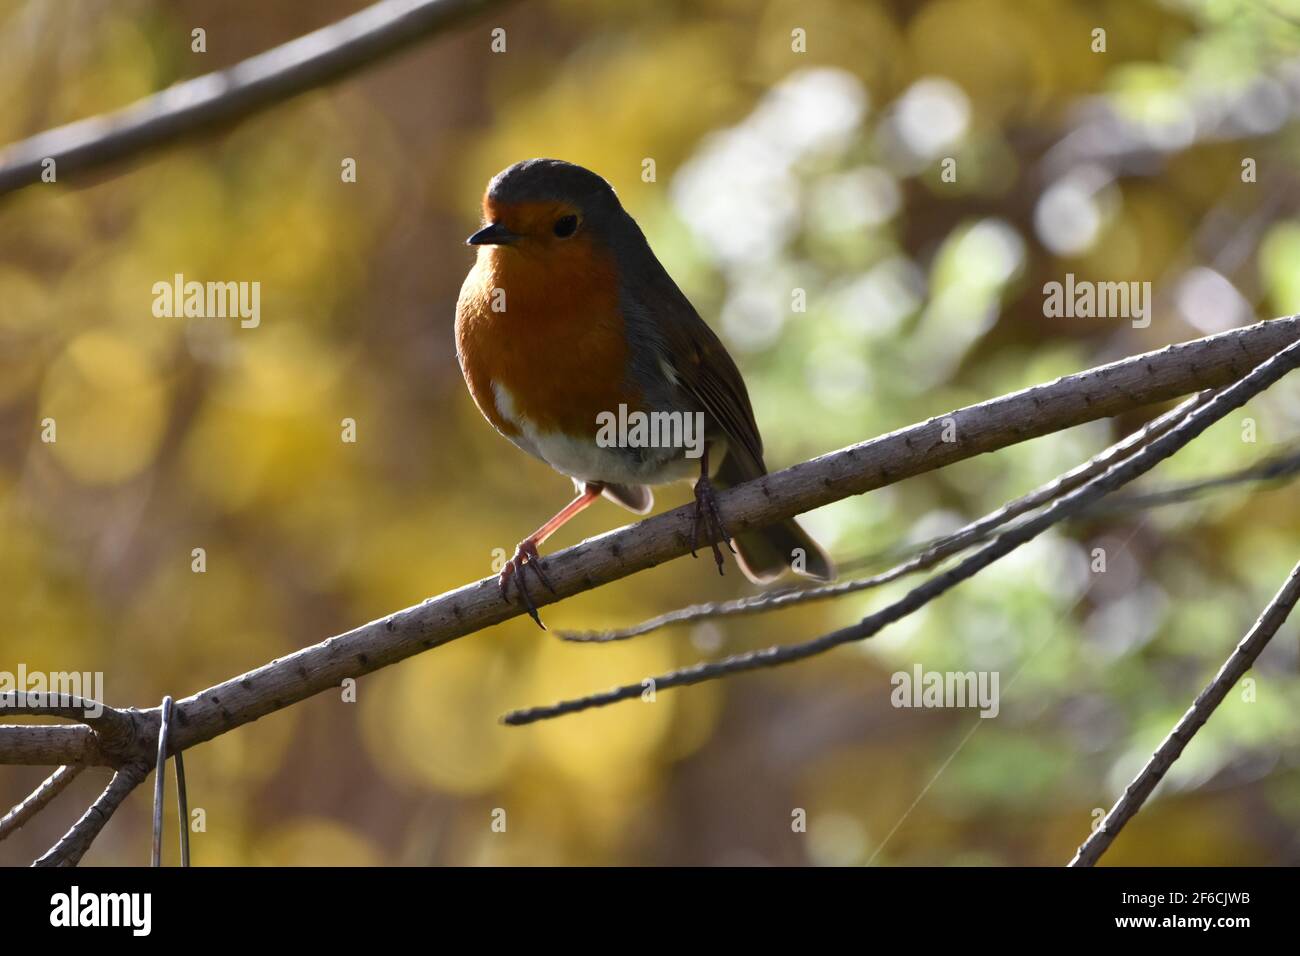 A Robin perched on a branch with a beautiful bokeh background Stock Photo